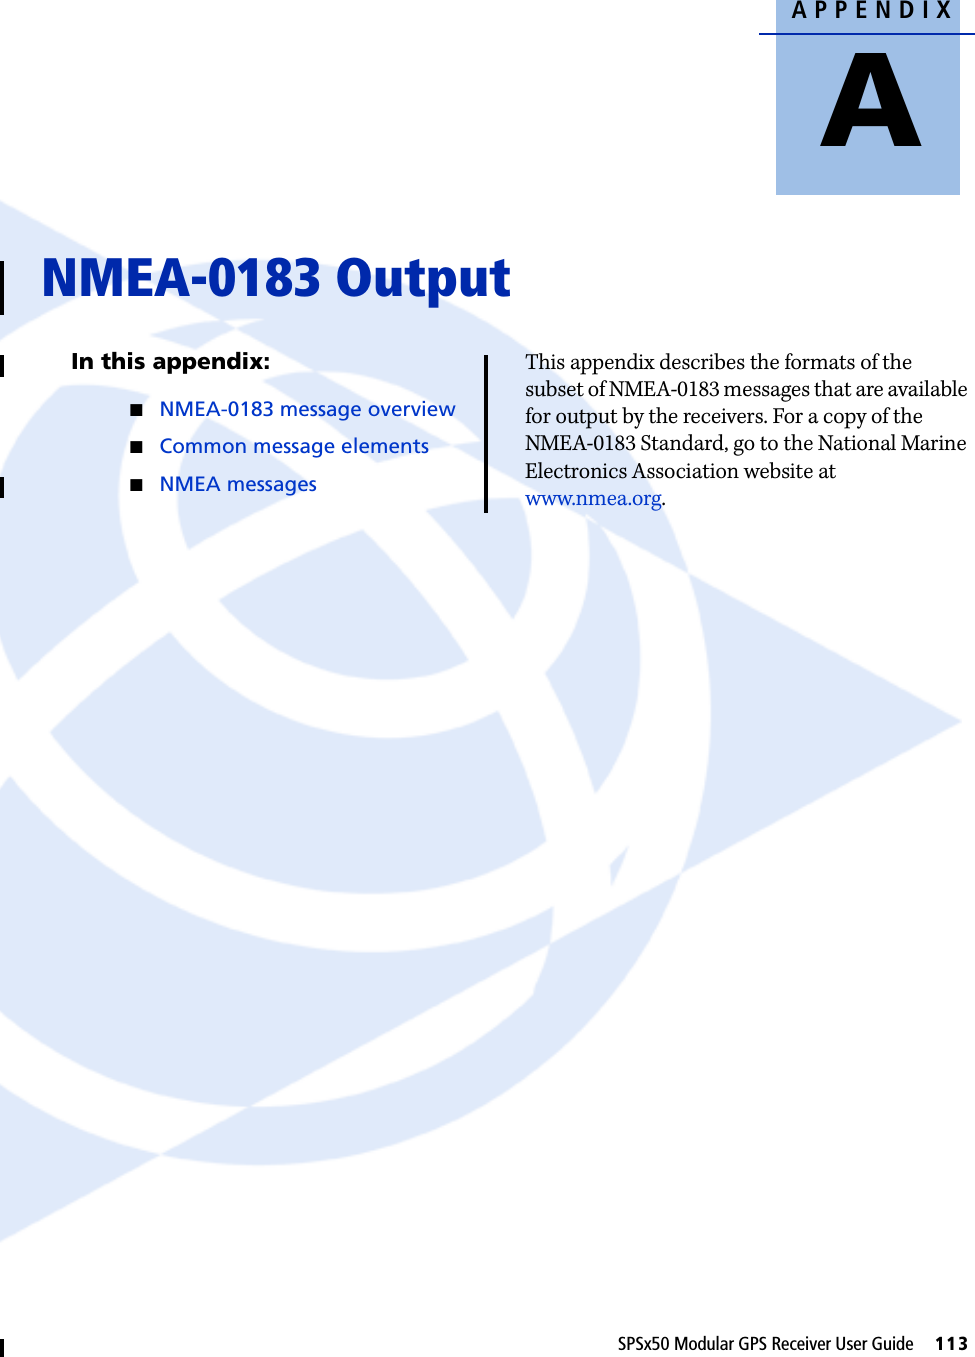 APPENDIXASPSx50 Modular GPS Receiver User Guide     113NMEA-0183 Output AIn this appendix:QNMEA-0183 message overviewQCommon message elementsQNMEA messagesThis appendix describes the formats of the subset of NMEA-0183 messages that are available for output by the receivers. For a copy of the NMEA-0183 Standard, go to the National Marine Electronics Association website at www.nmea.org.